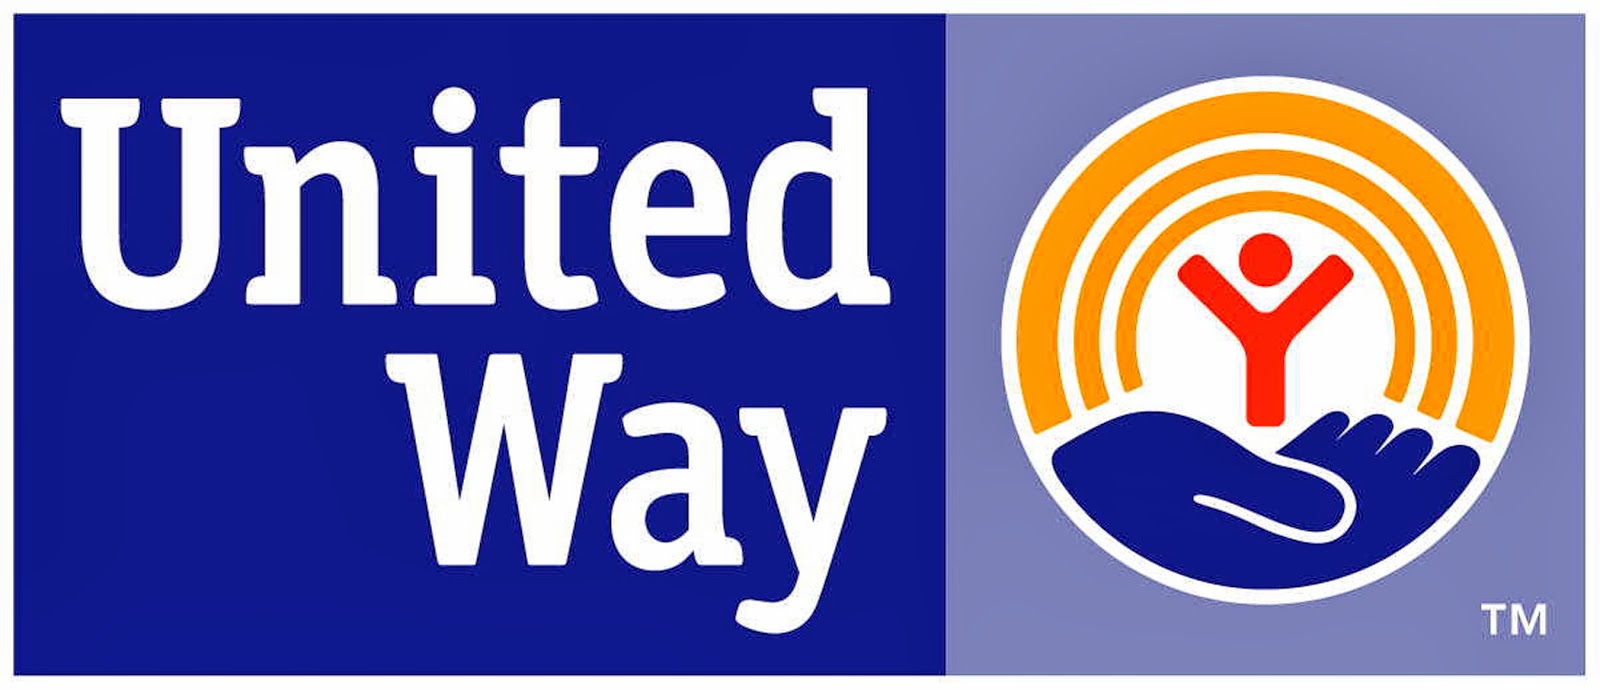 The Connection 10 Facts About United Way Will You Donate Today?